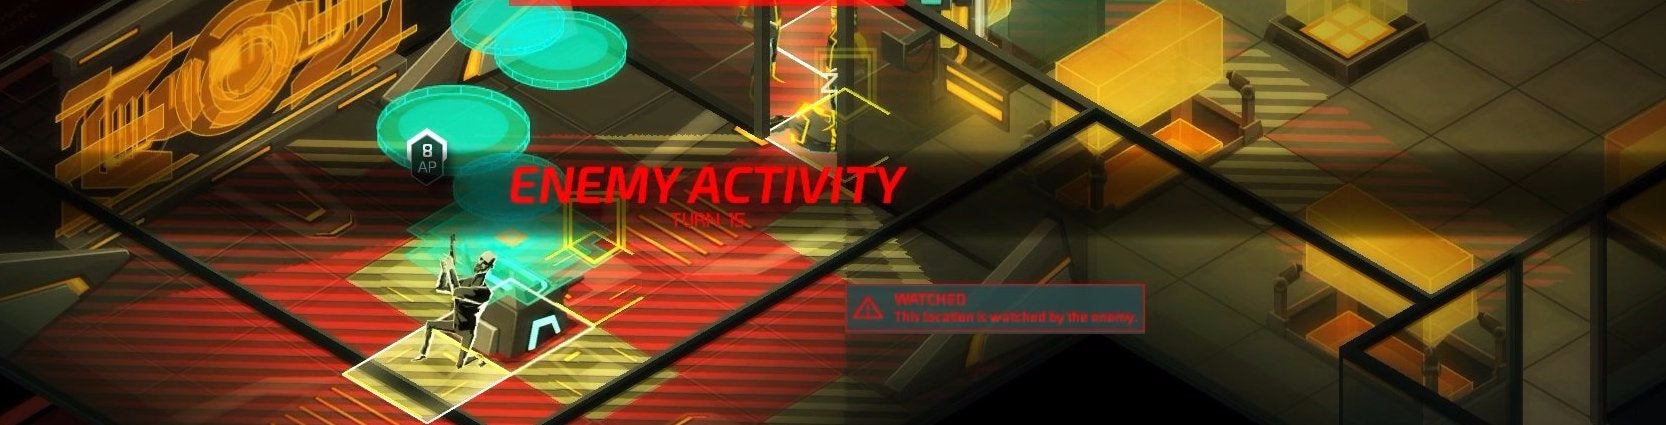 Image for Video: The final mission of Invisible, Inc.